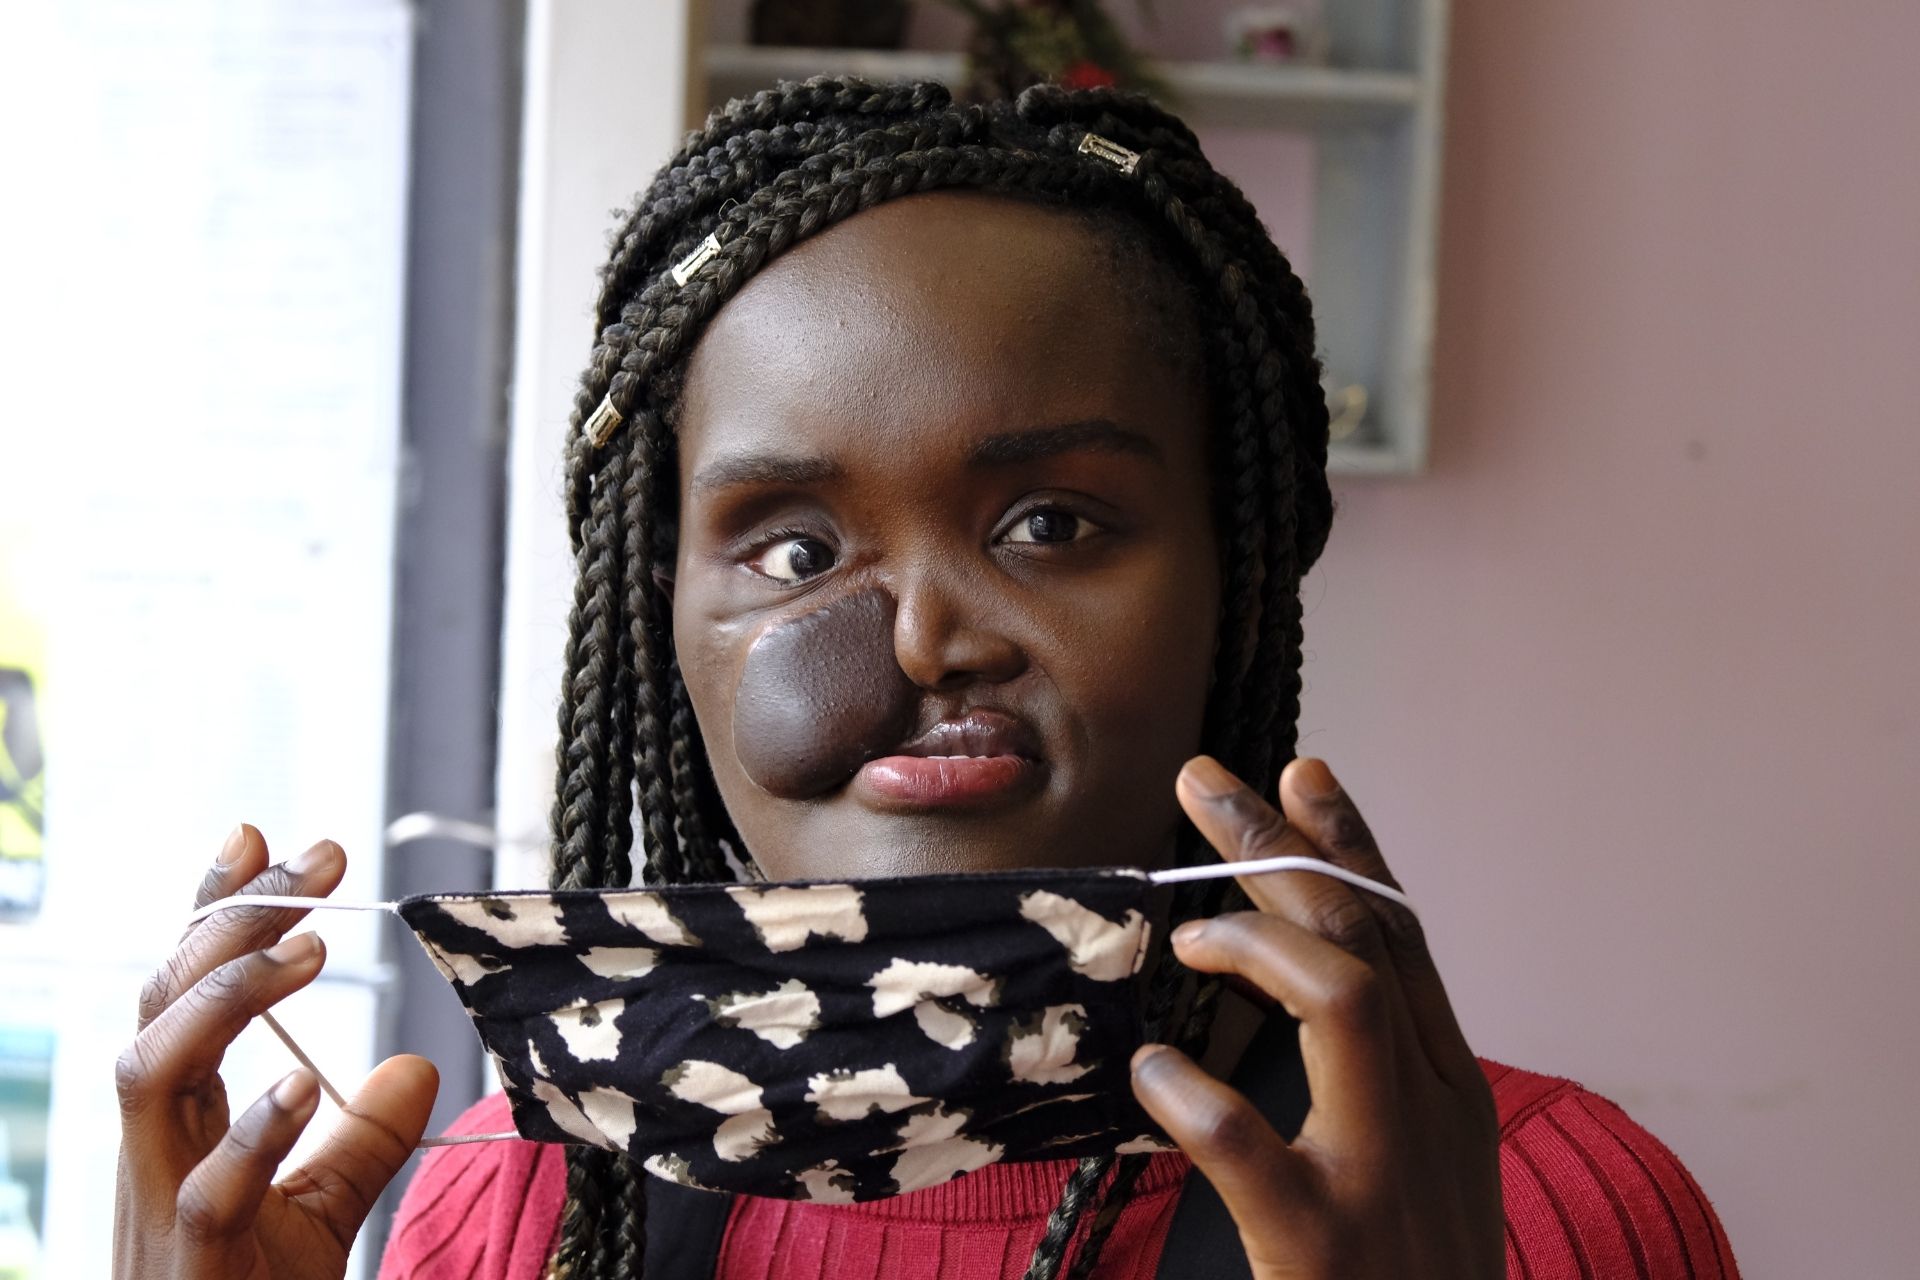 Crystal, a young woman in her early 20s. She has a skin flap on her cheek and braided hair. She's wearing a pink/red jumper and is holding up a face covering in front of her. 